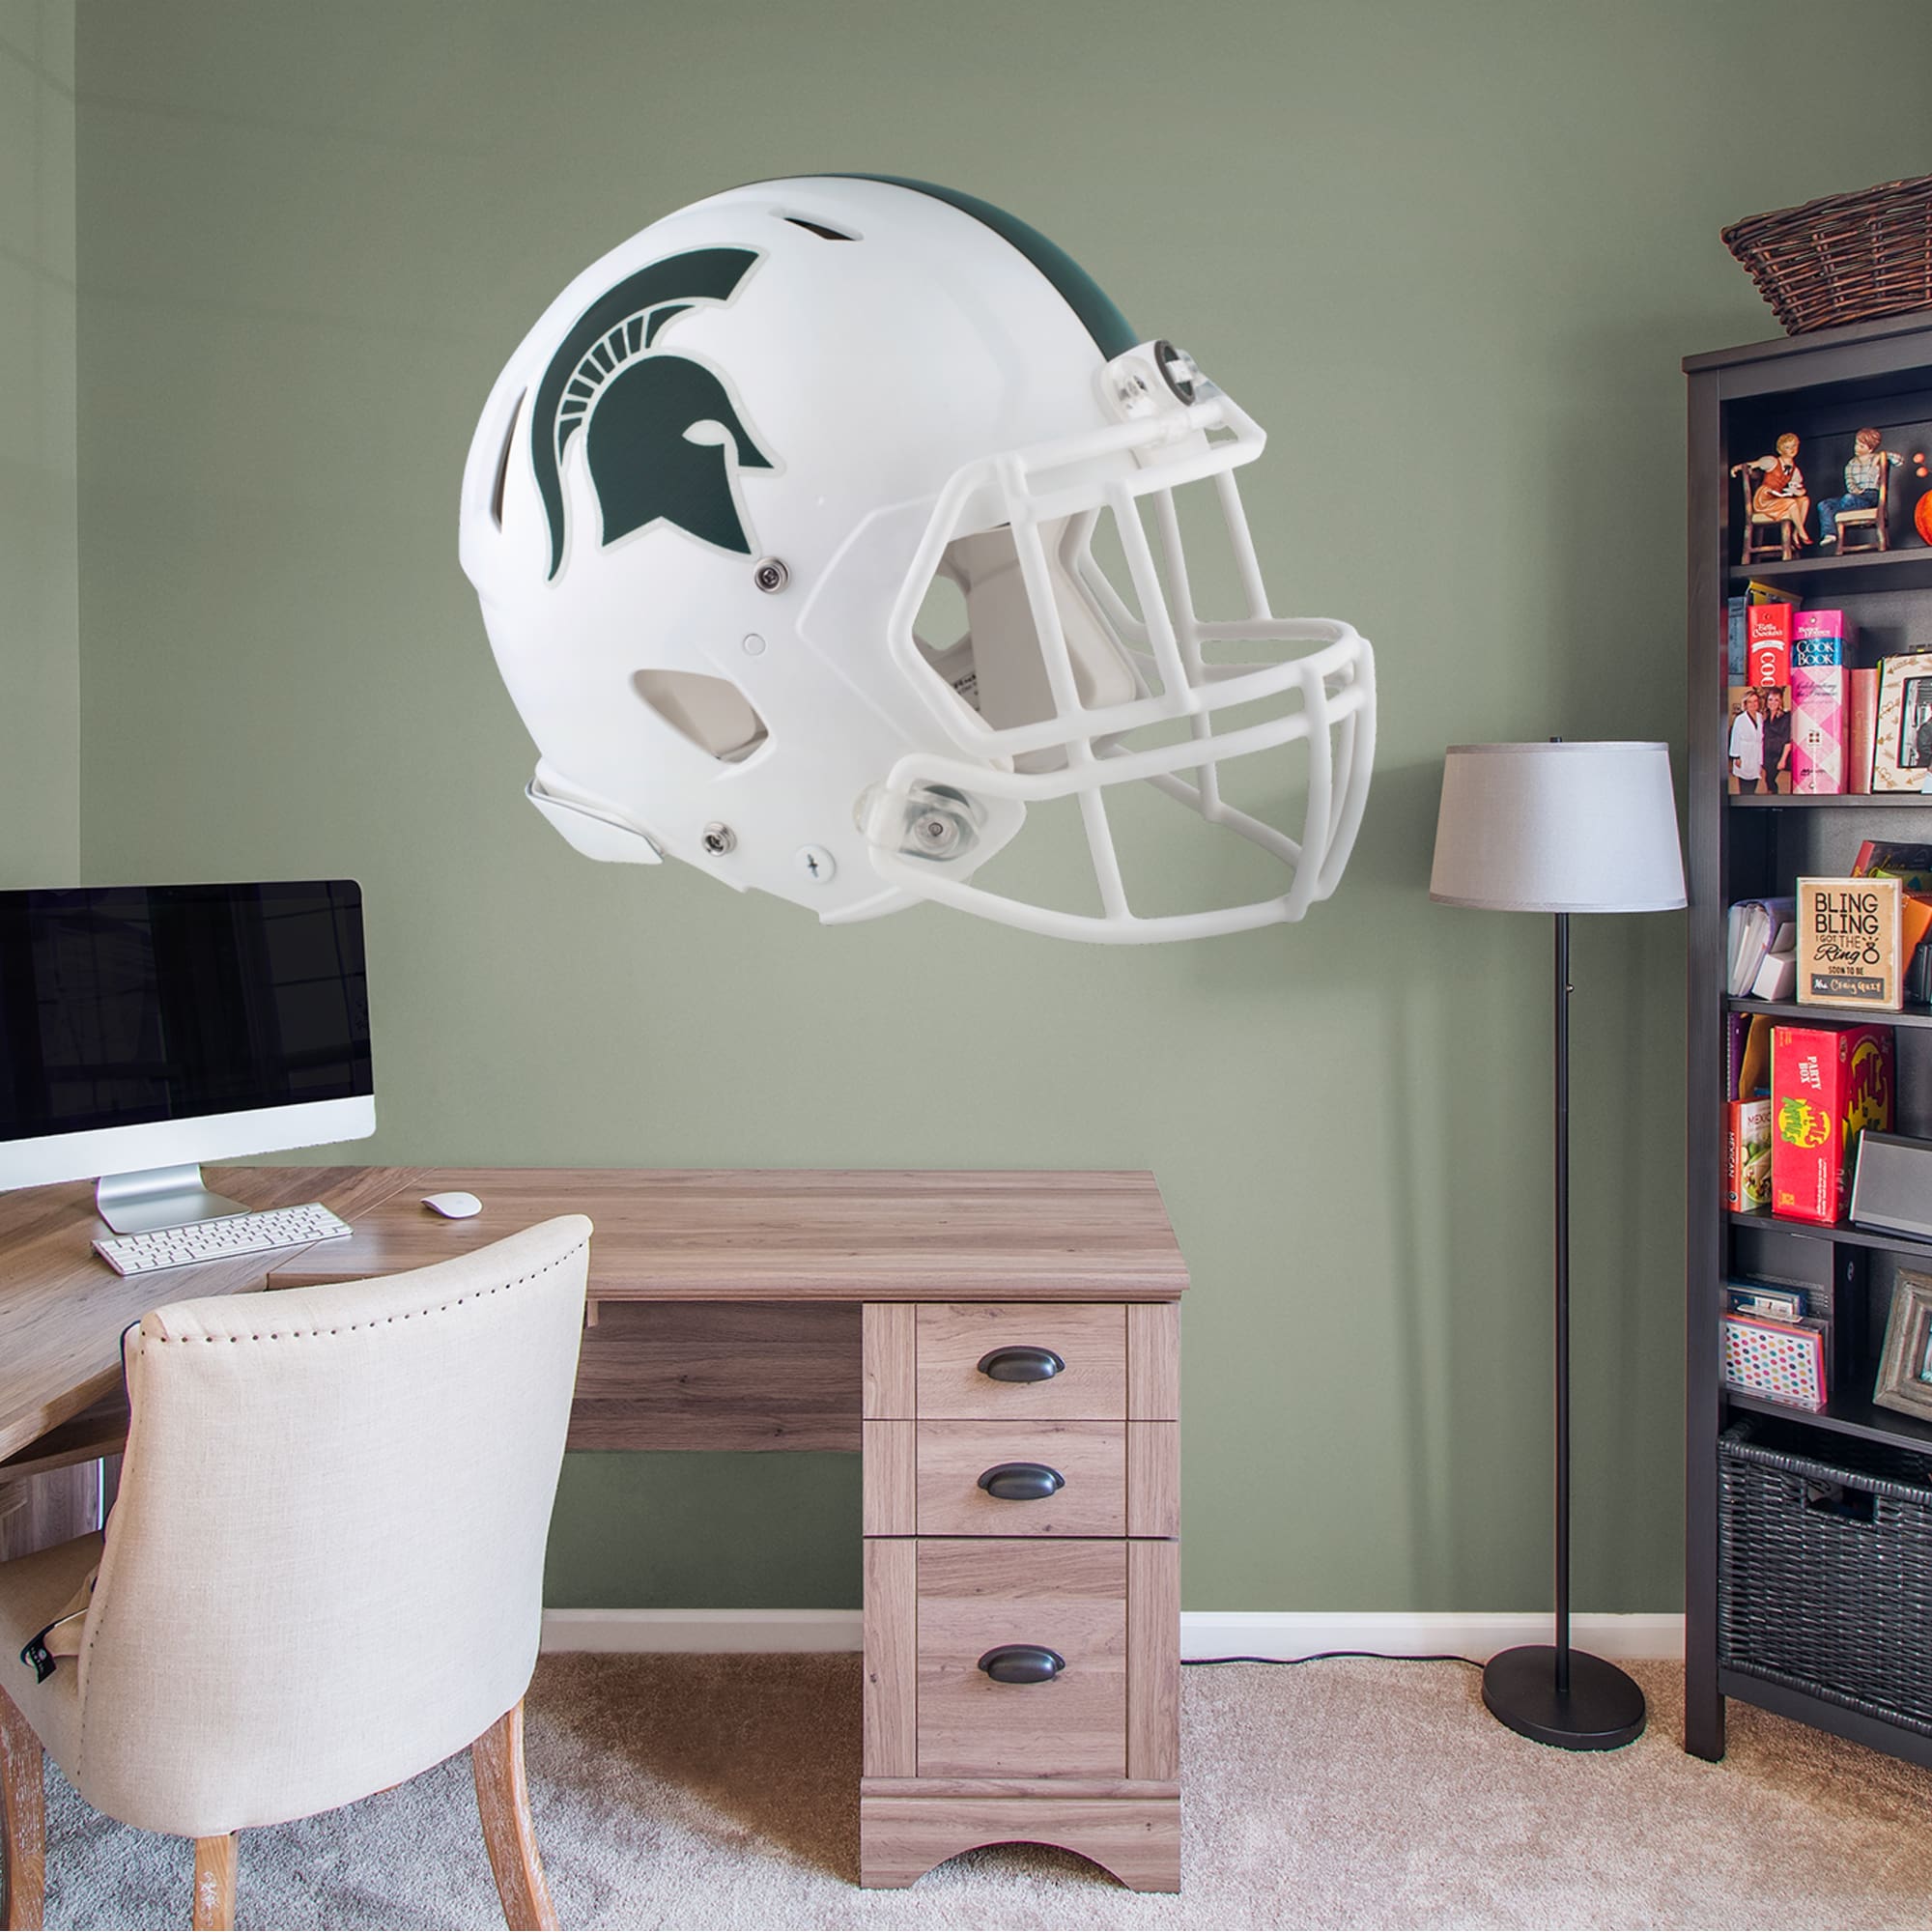 Michigan State Spartans: White Helmet - Officially Licensed Removable Wall Decal 52.0"W x 44.0"H by Fathead | Vinyl